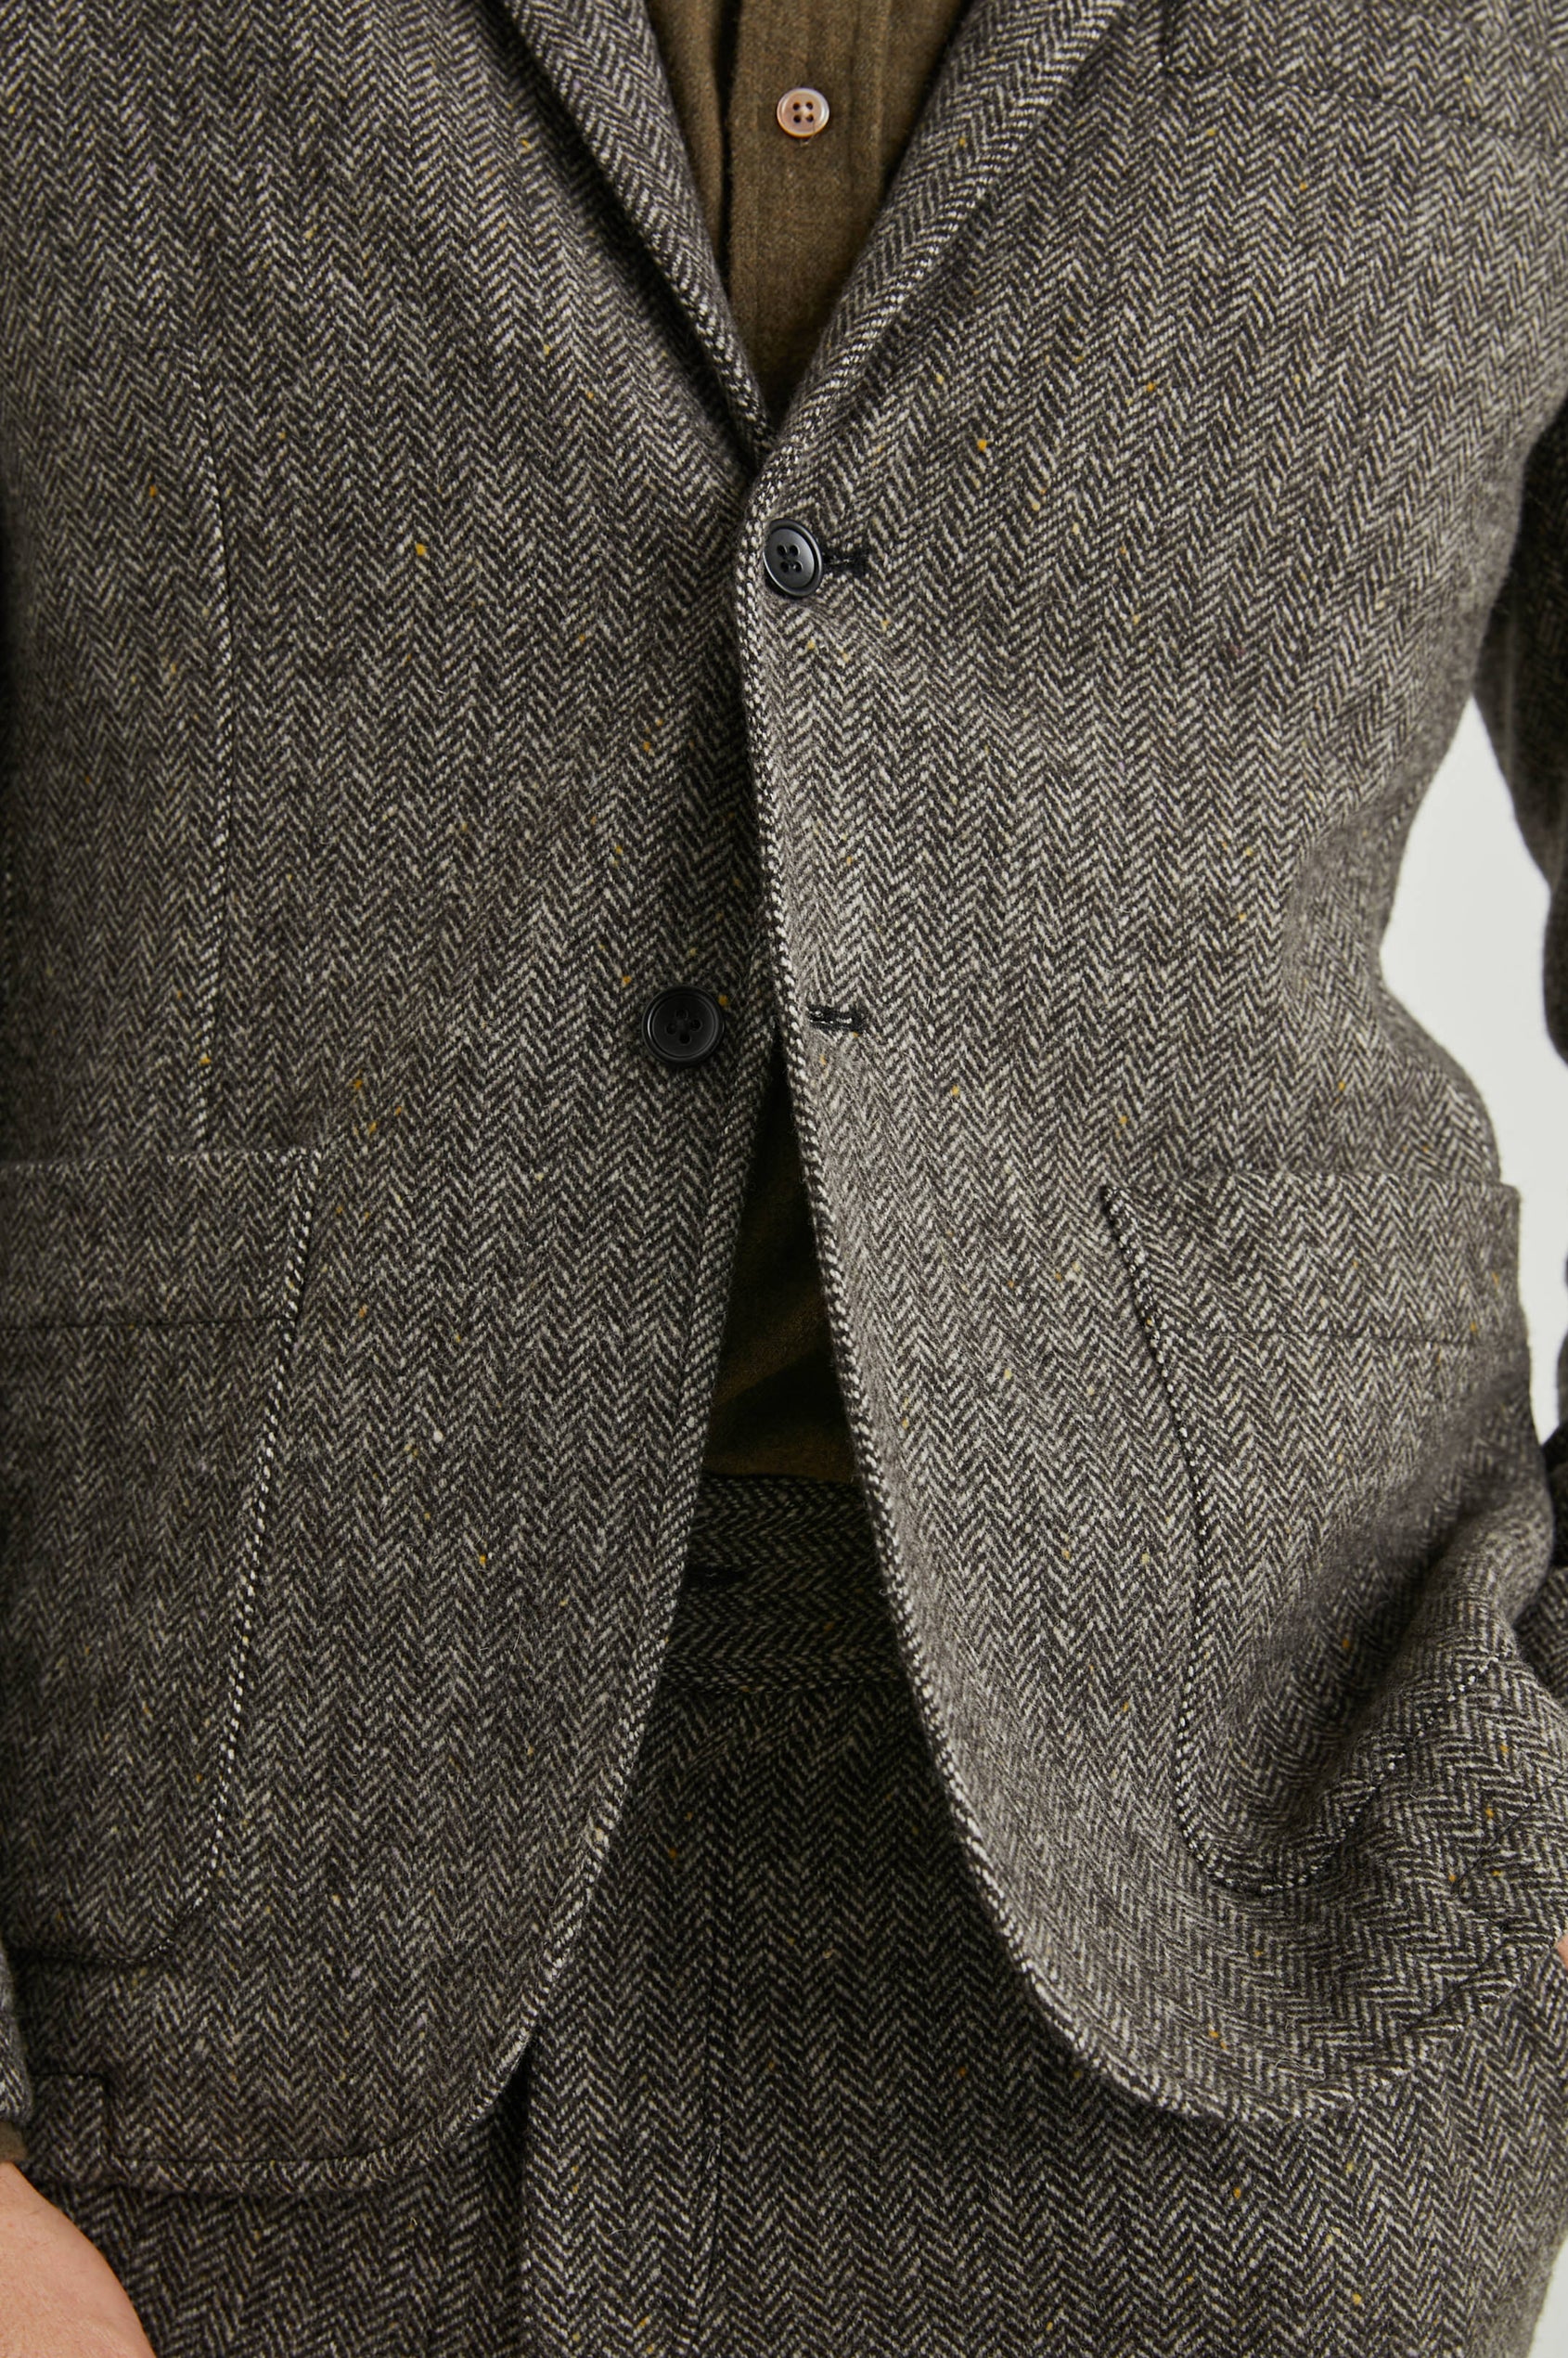 How to Wear a Tweed Blazer - the gray details